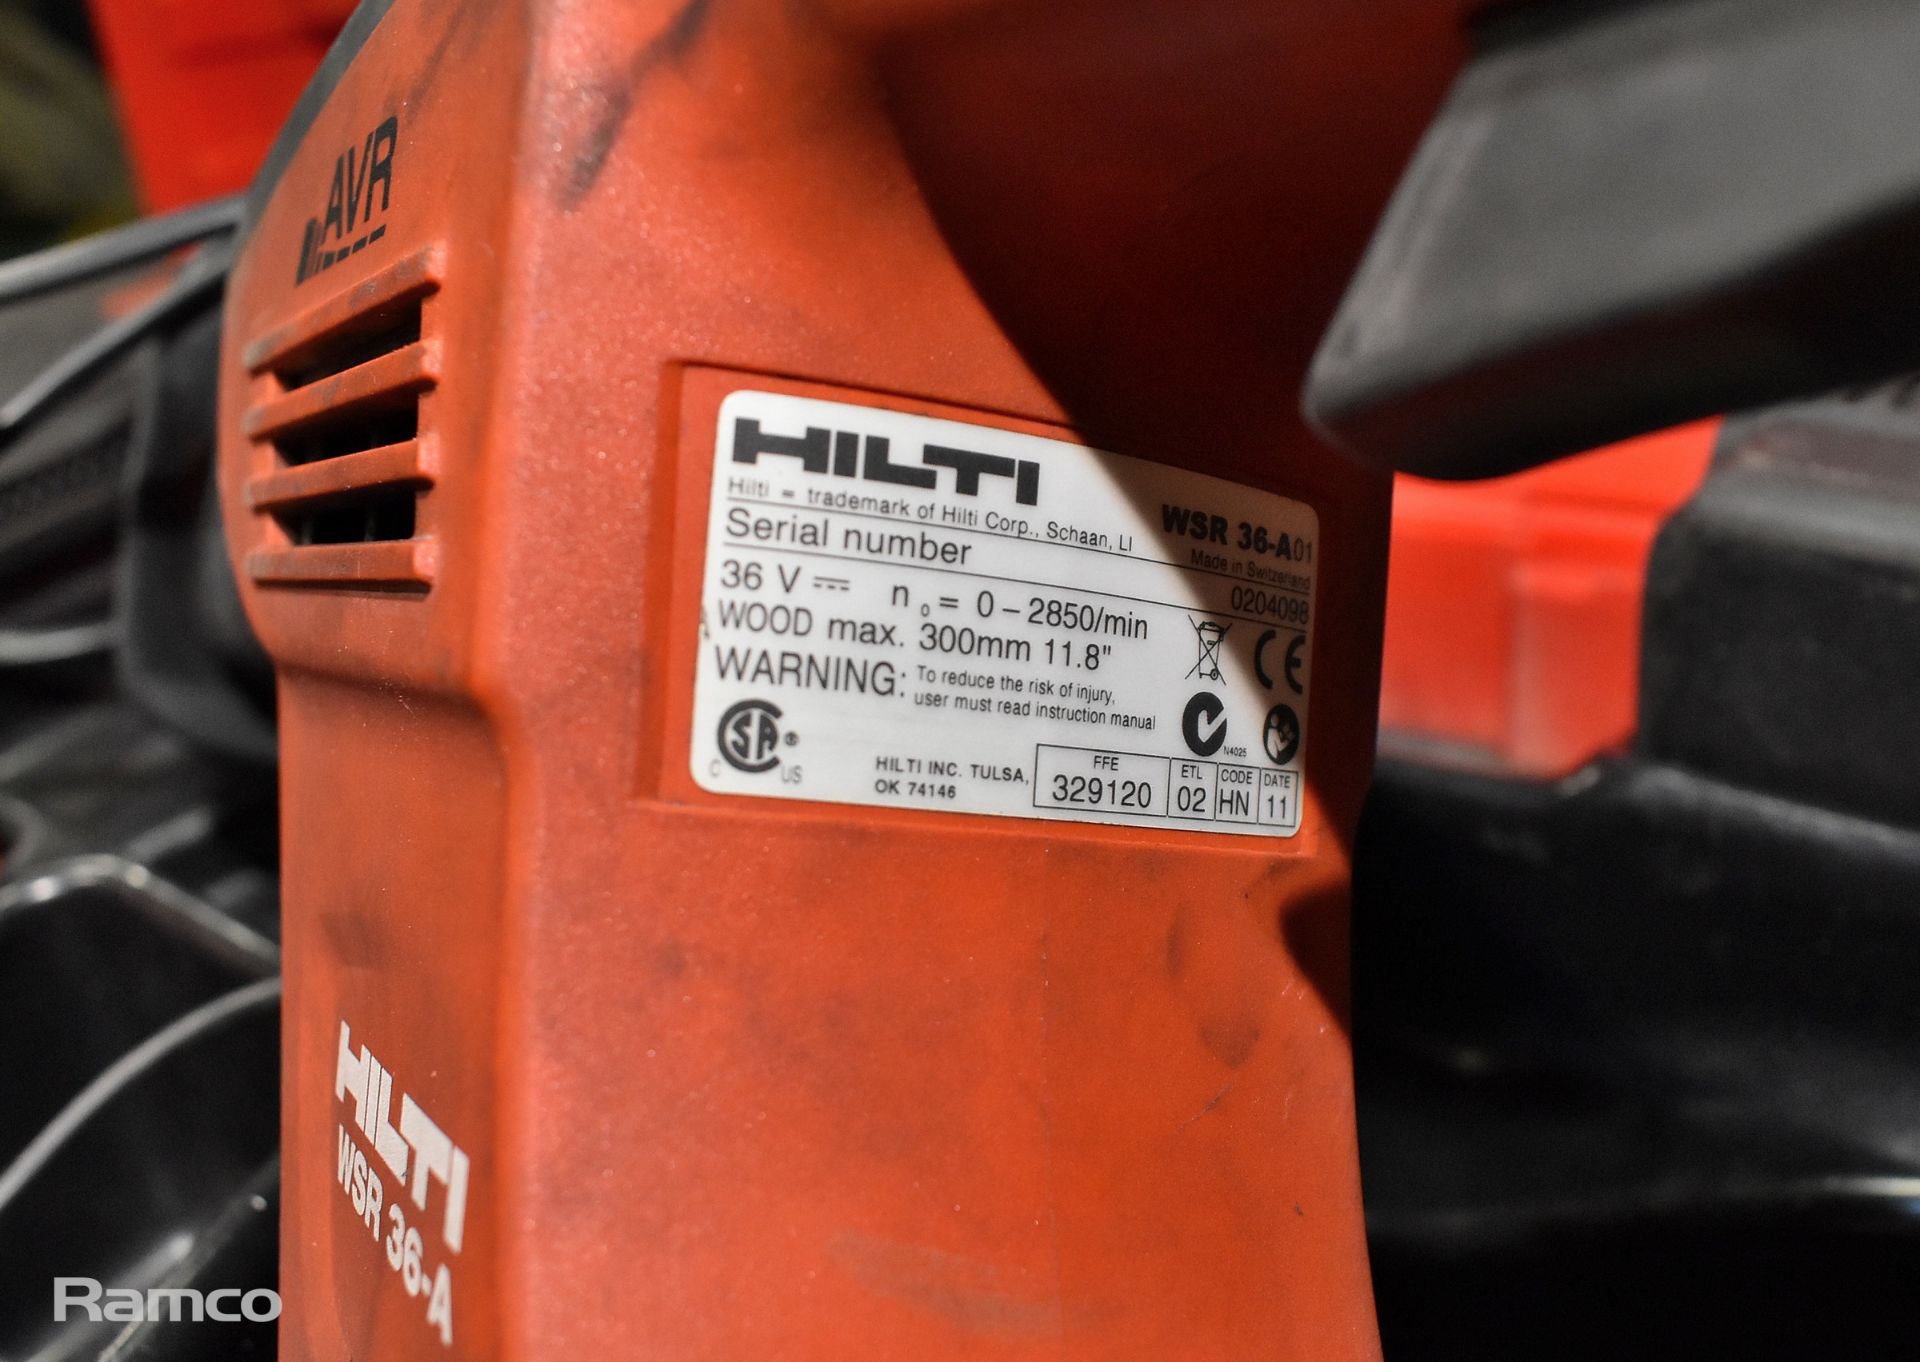 HILTI WSR 36-A heavy duty reciprocating saw in hard carry case - Image 3 of 5